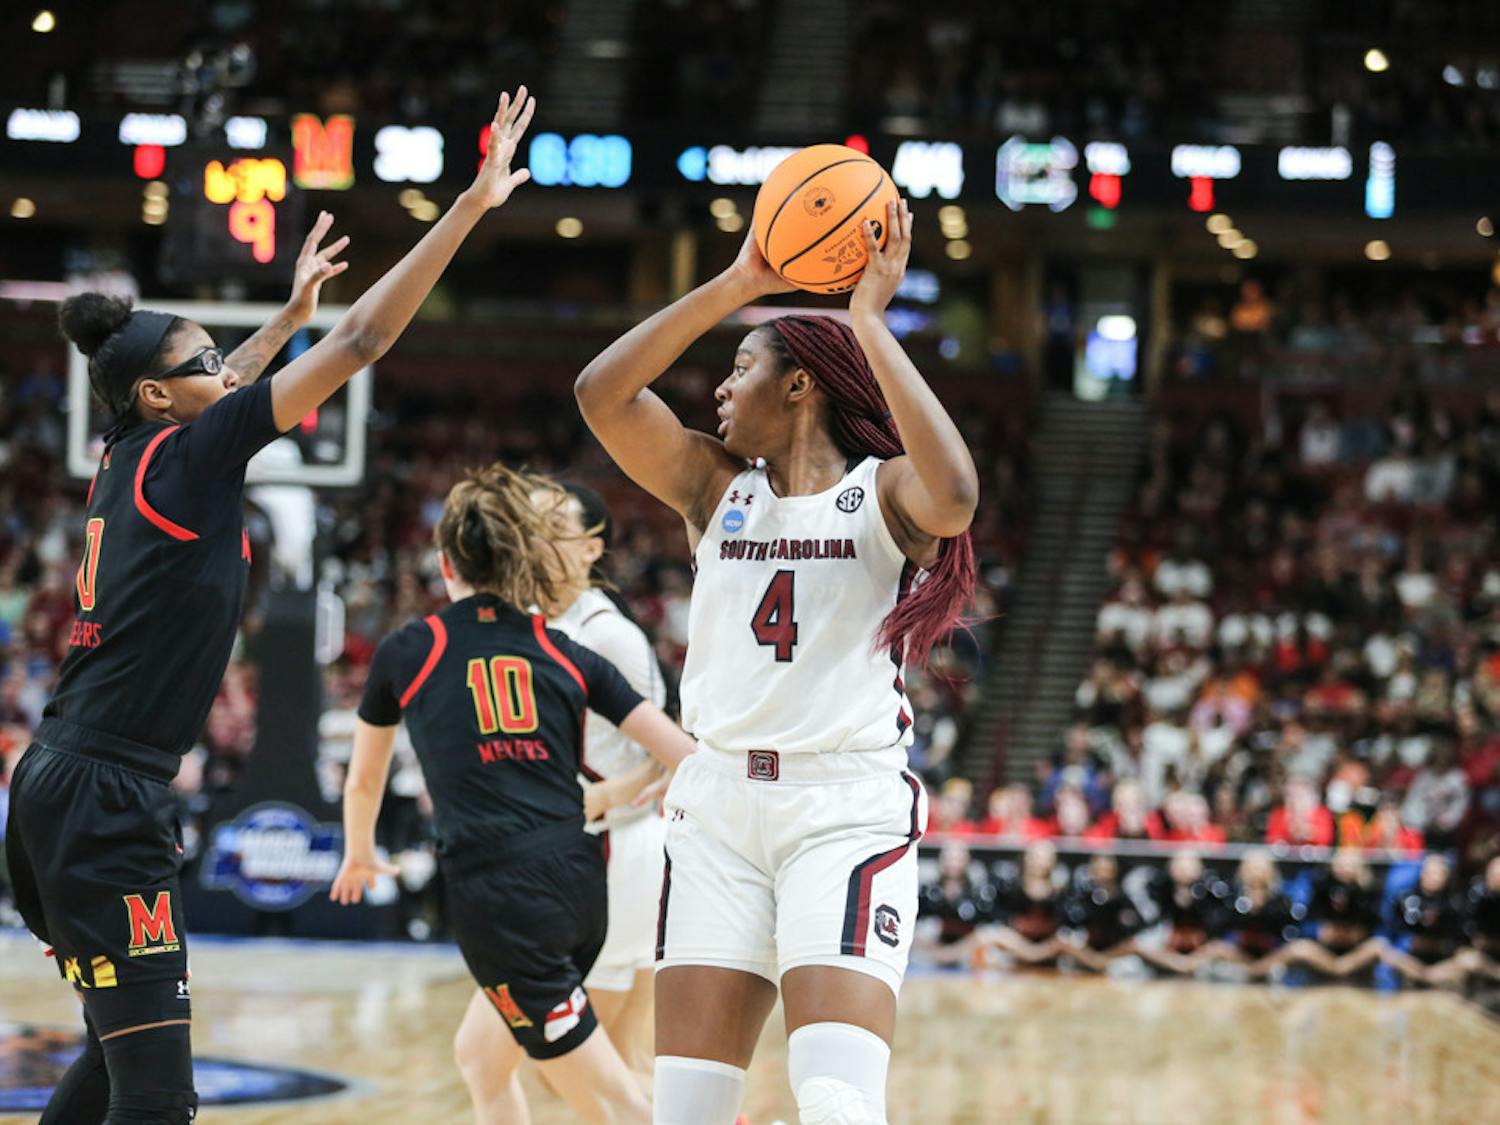 Senior forward Aliyah Boston looks to pass the ball during the Elite Eight game against Maryland on March 27, 2023. The Gamecocks won 86-75, advancing to the Final Four.